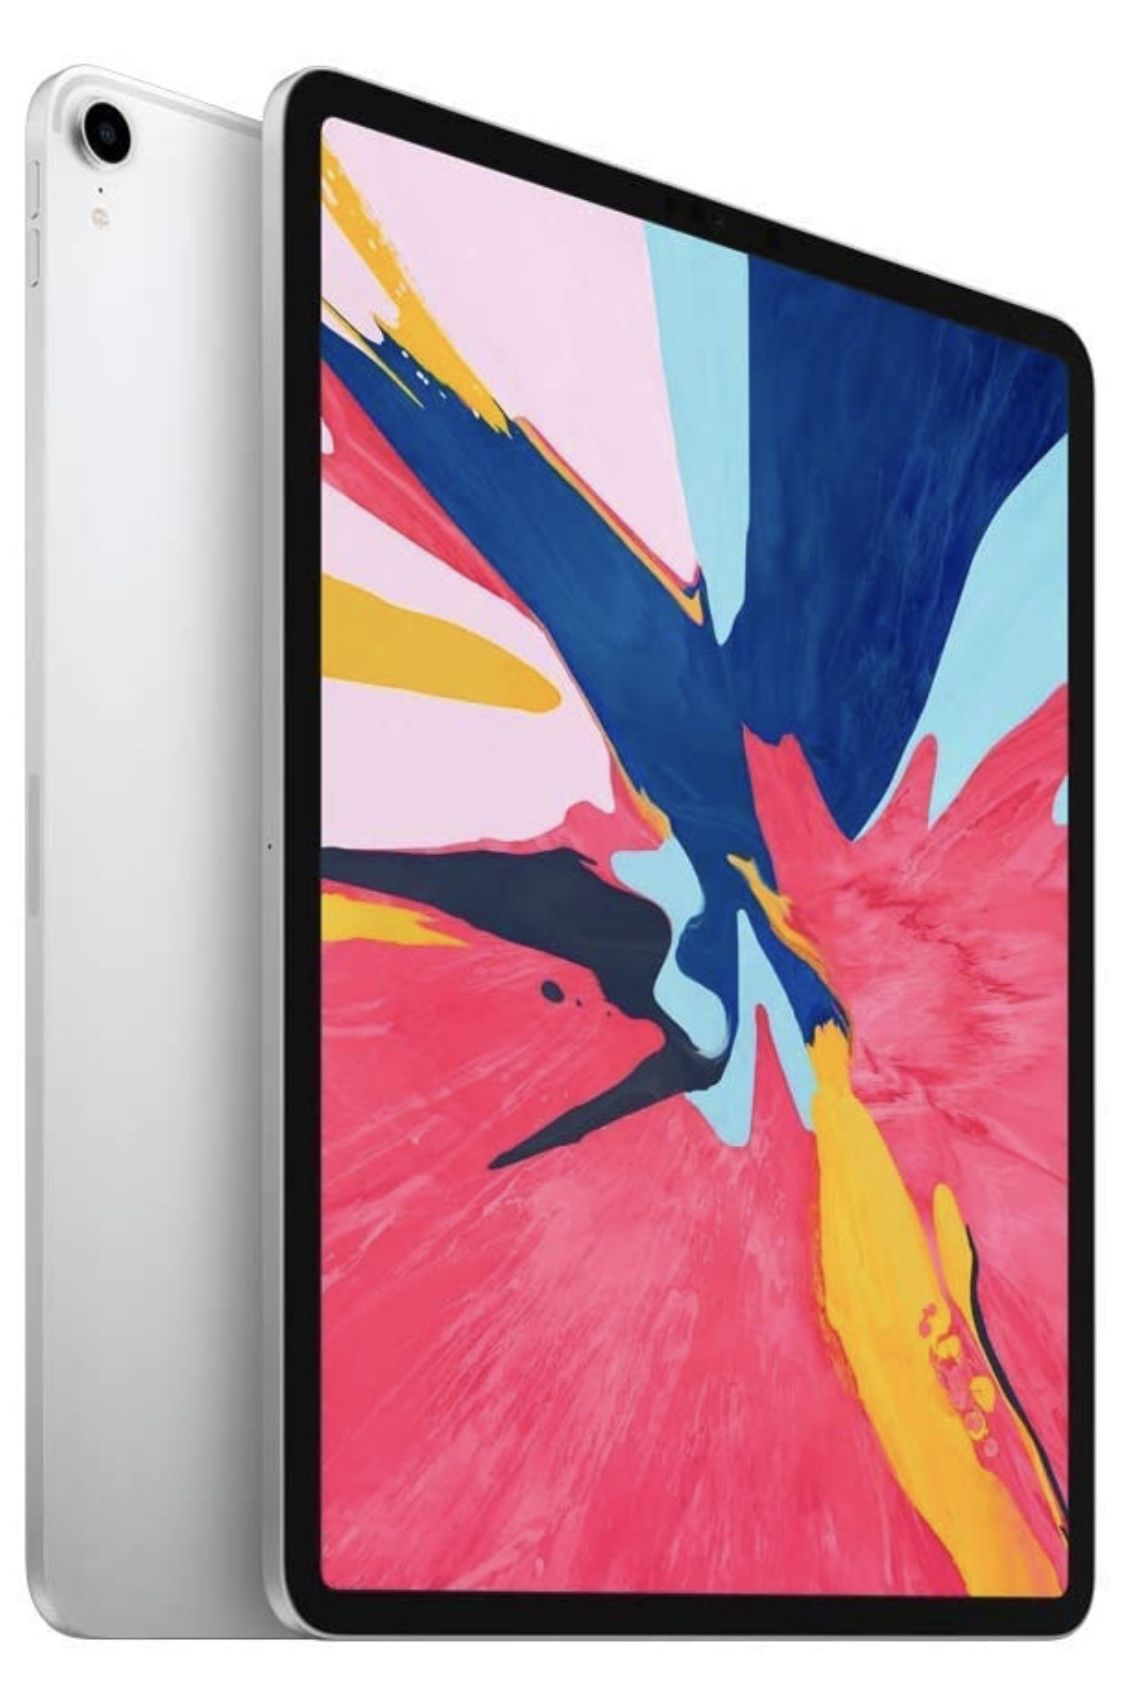 Brand new iPad Pro 3rd gen 12.9 inch 512 cellular with screen protector and Limited warranty,case